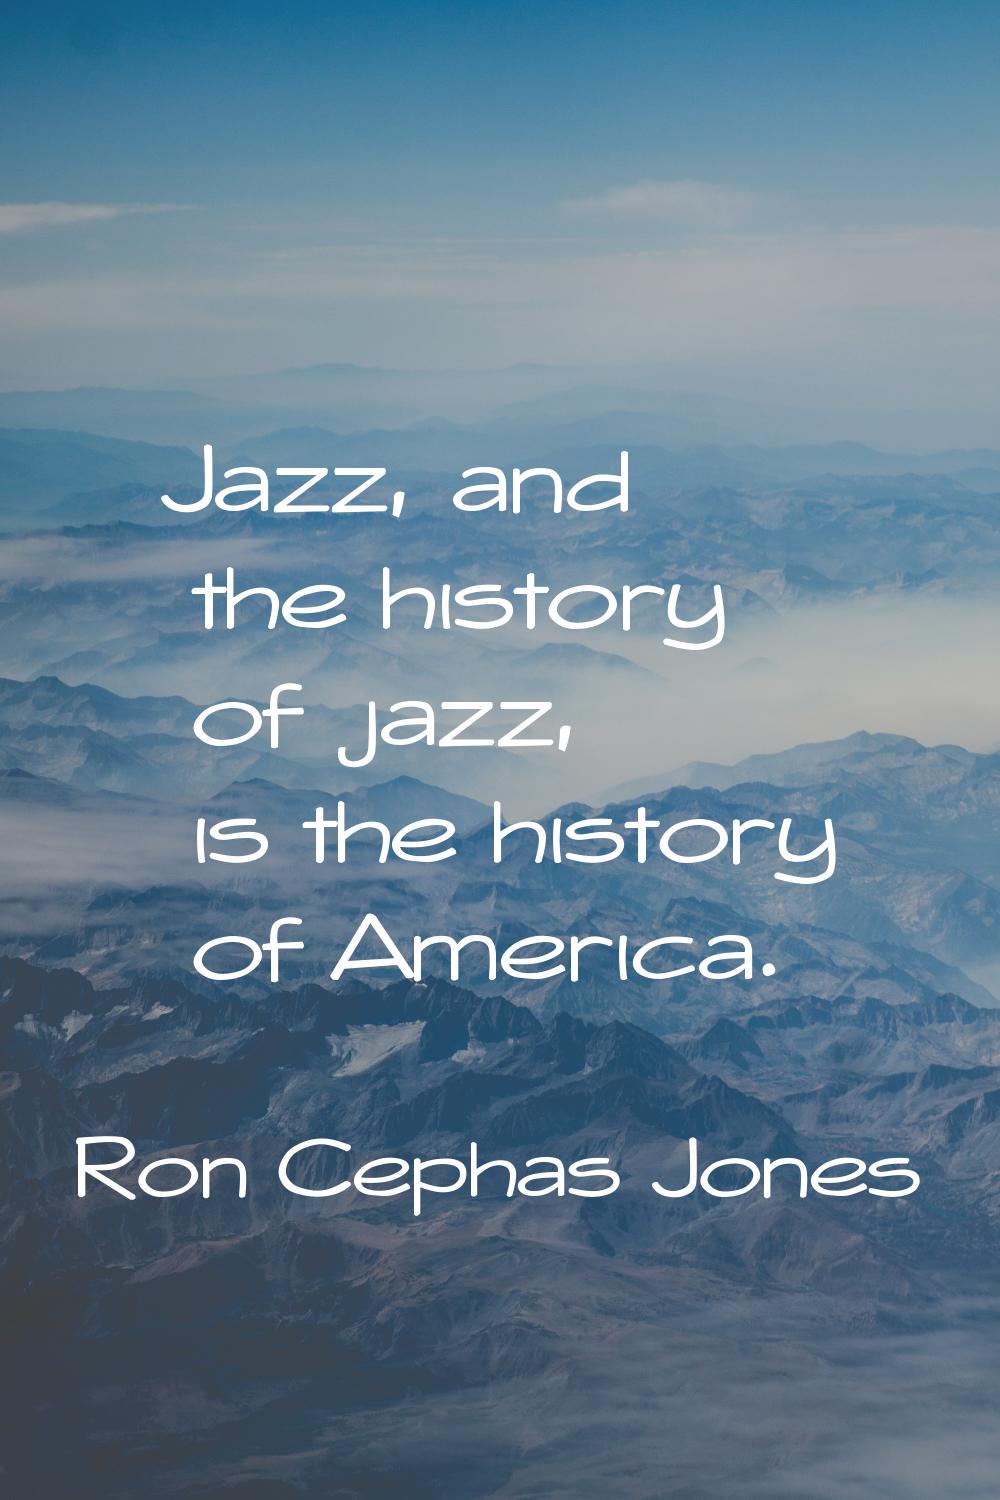 Jazz, and the history of jazz, is the history of America.